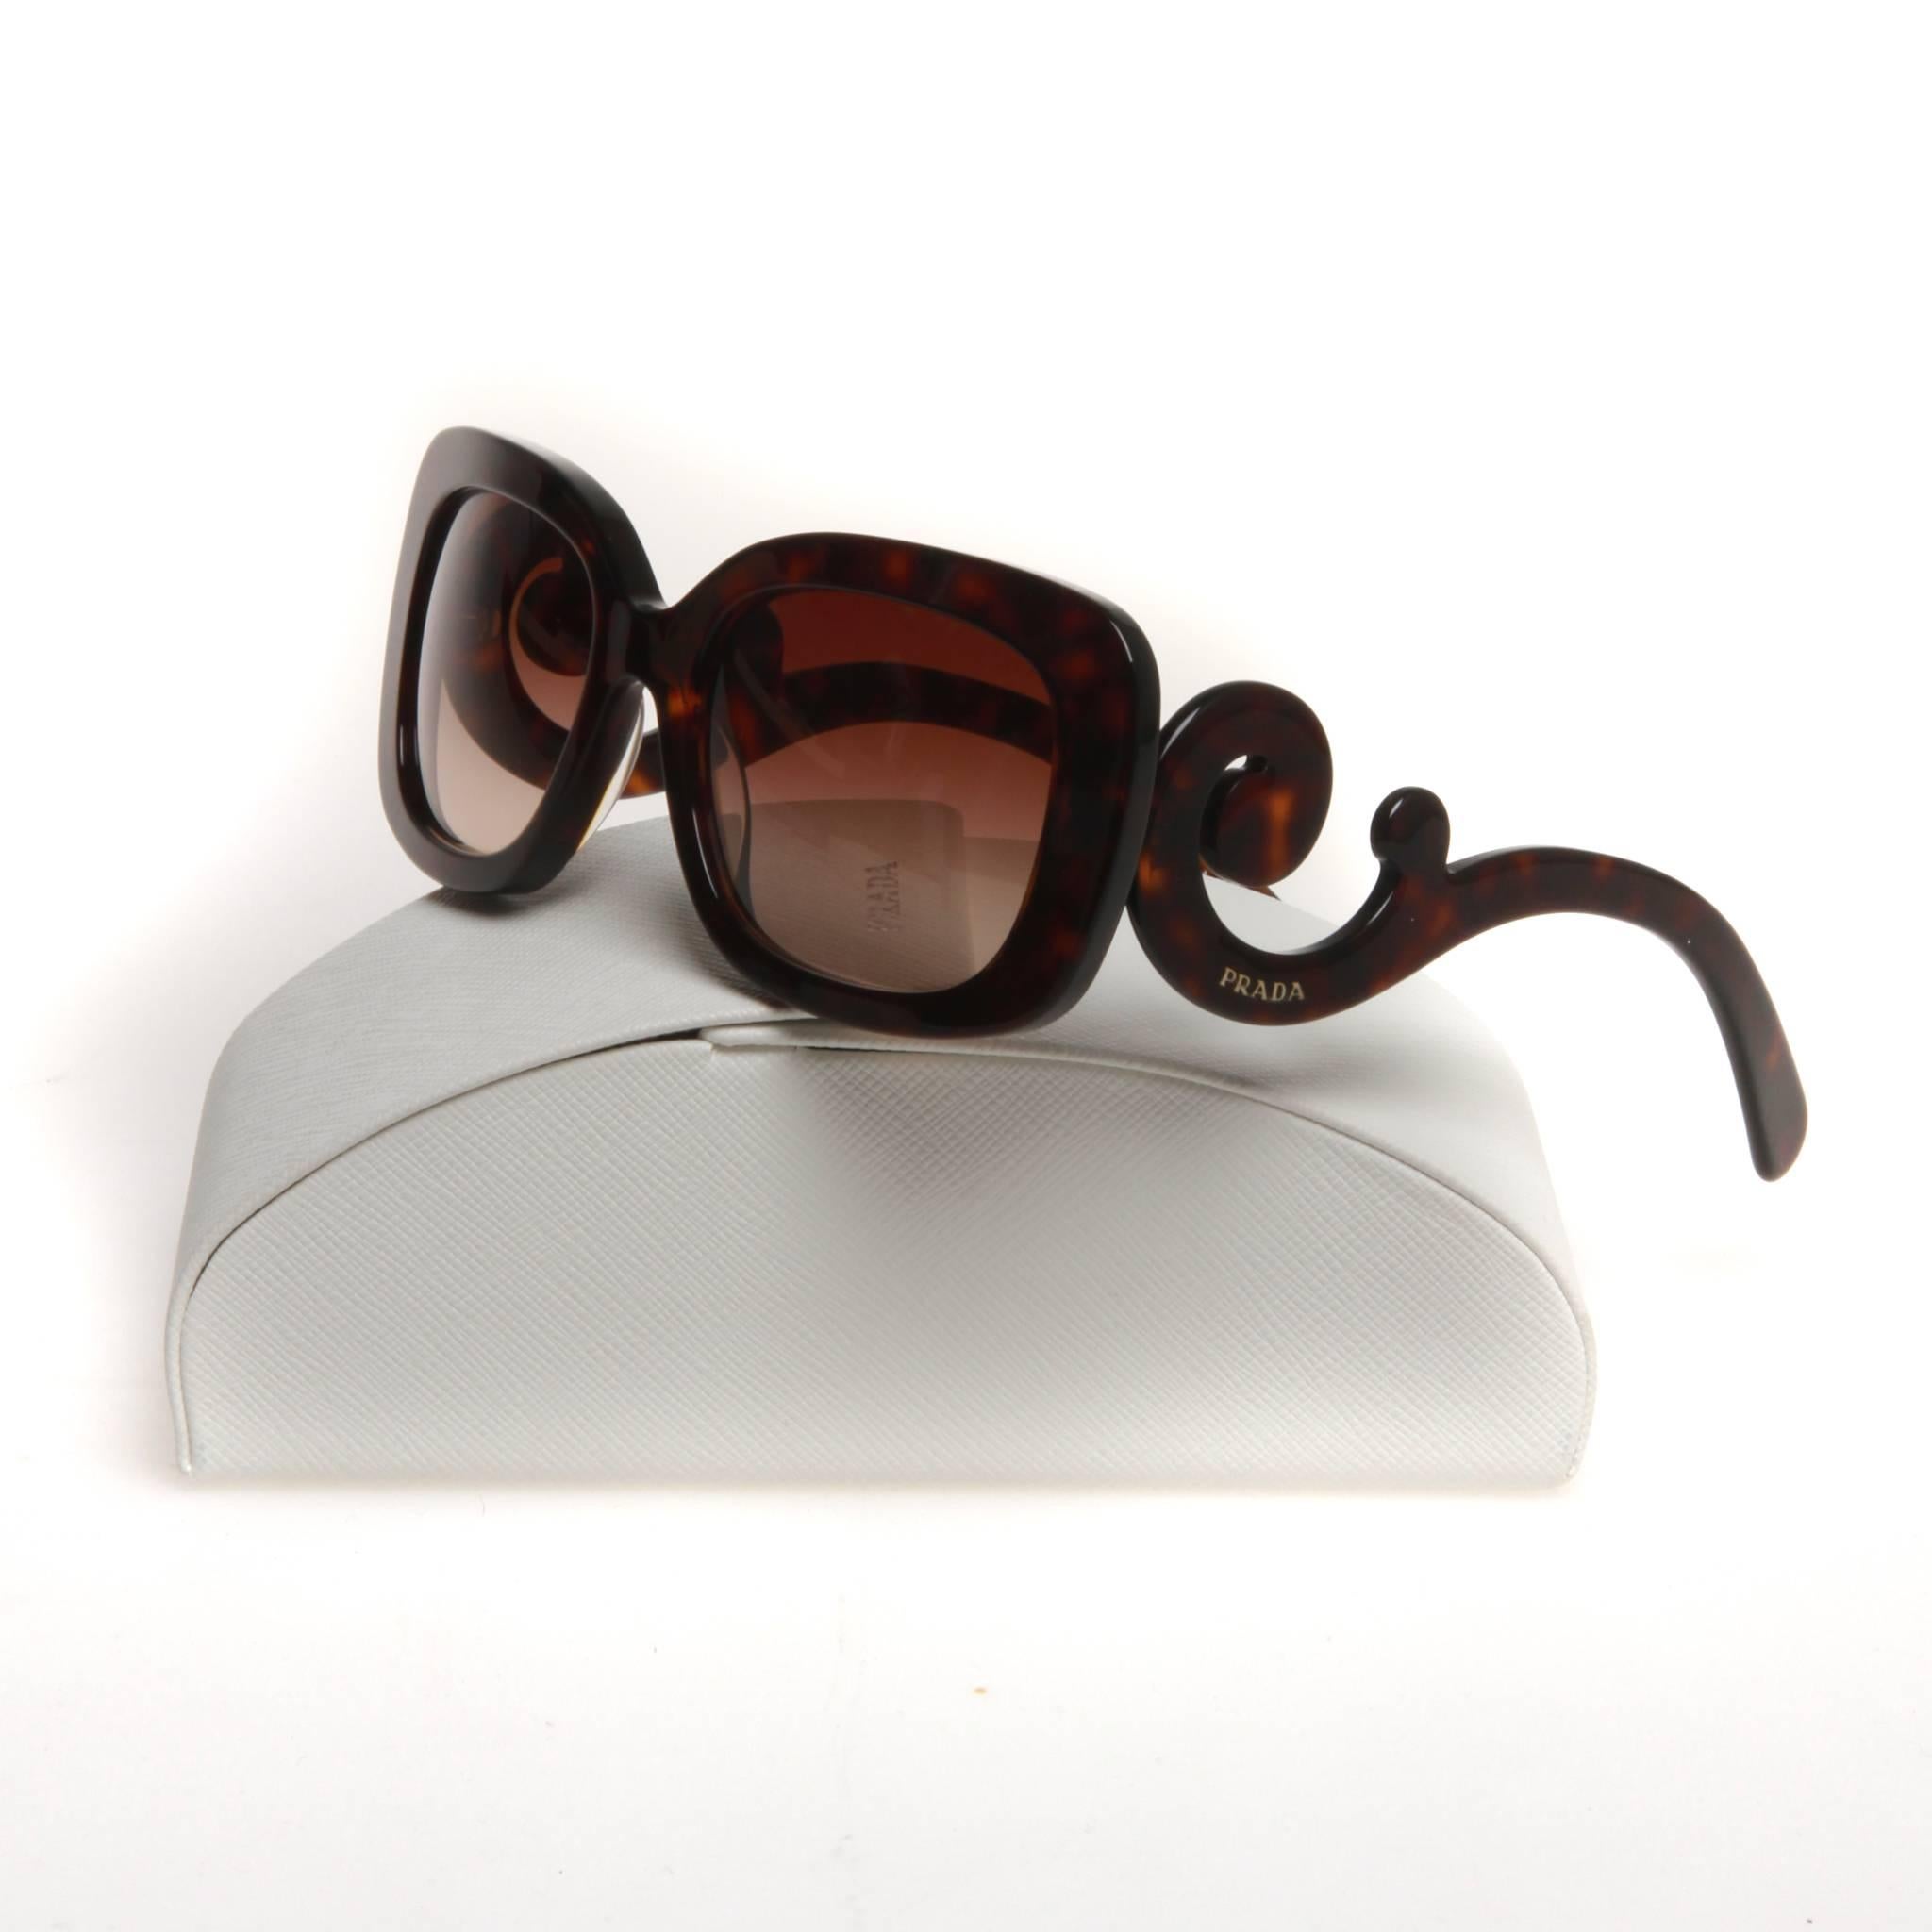 Brown tortoiseshell acetate Prada sunglasses with Baroque accents at temples featuring gold-tone logo and gradient lenses. Includes case, cloth and box.